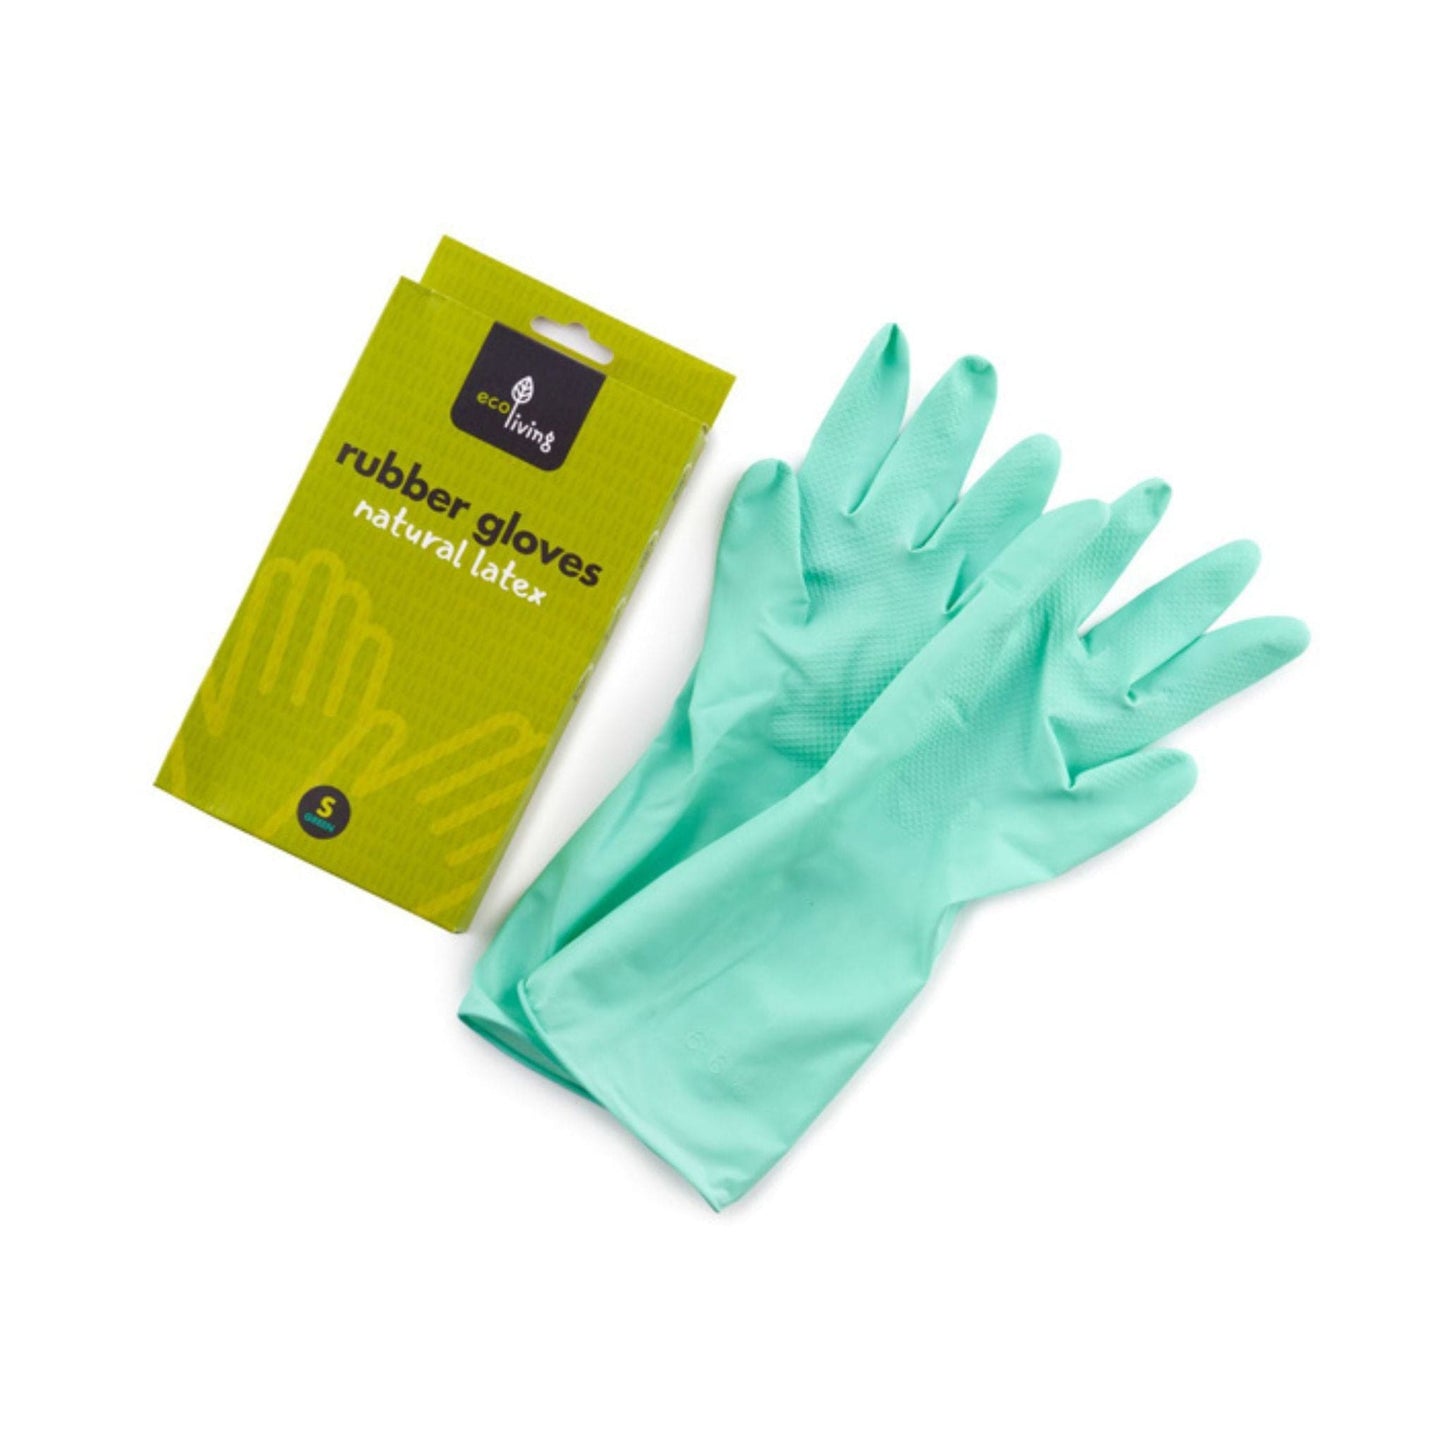 ecoLiving Dishwasher Cleaners Natural Laex Rubber Gloves - Green - Ecoliving